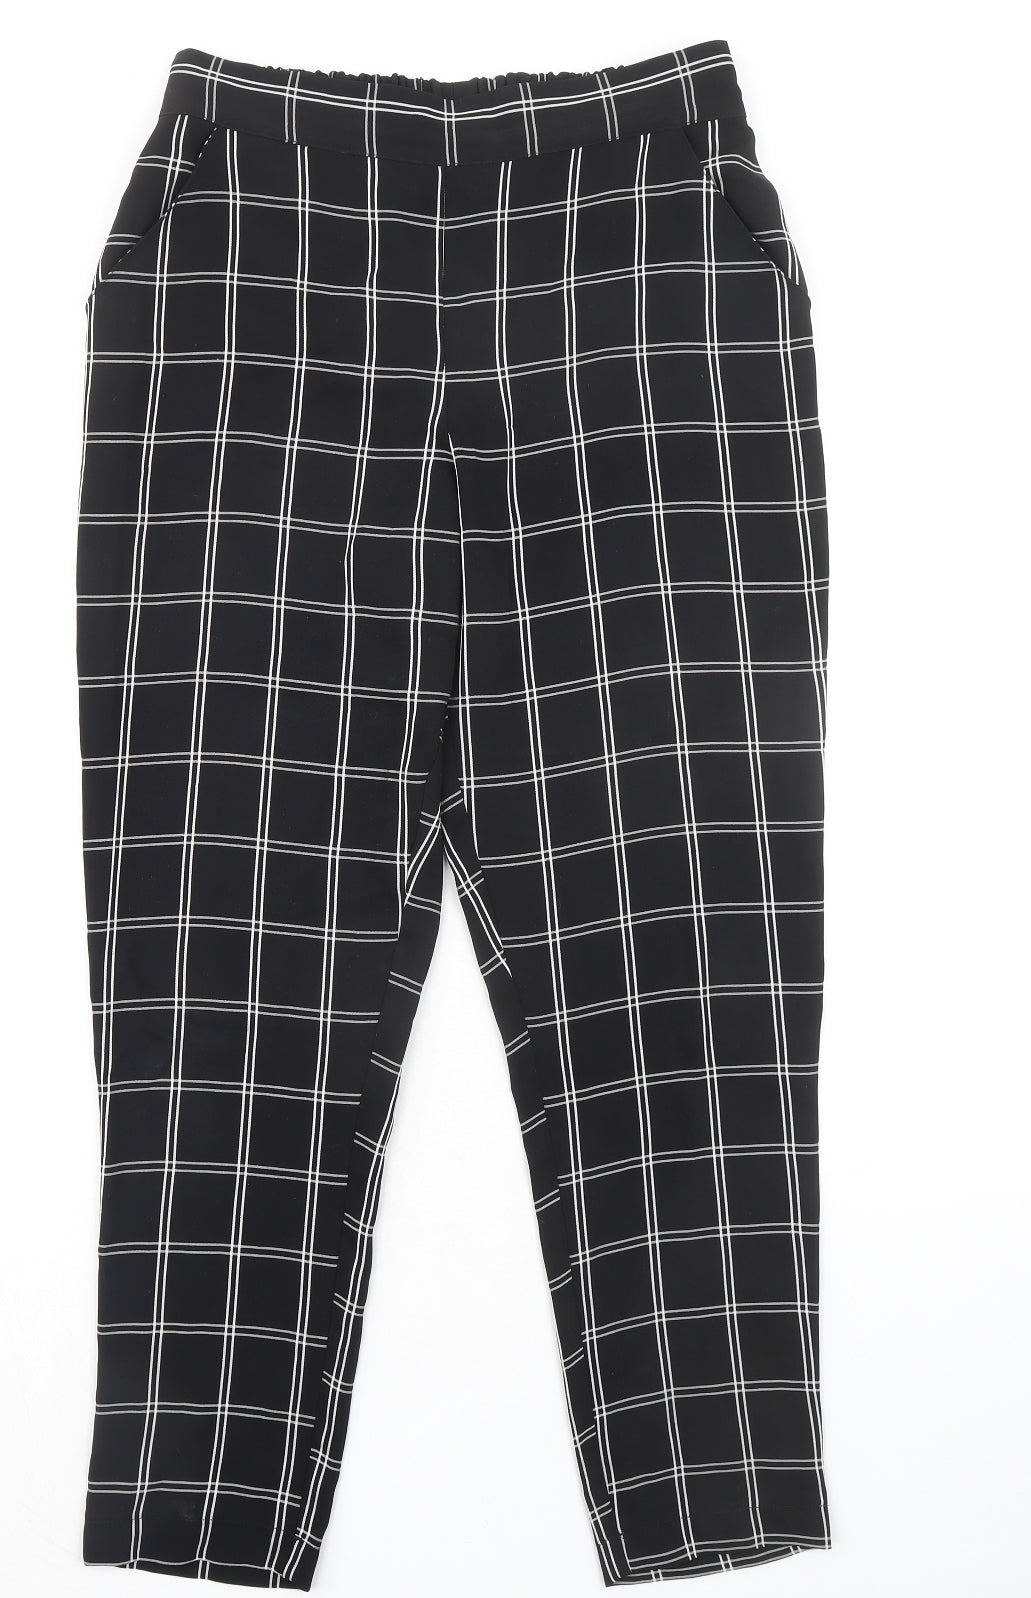 Principles Womens Black Check Polyester Trousers Size 10 L27 in Regular